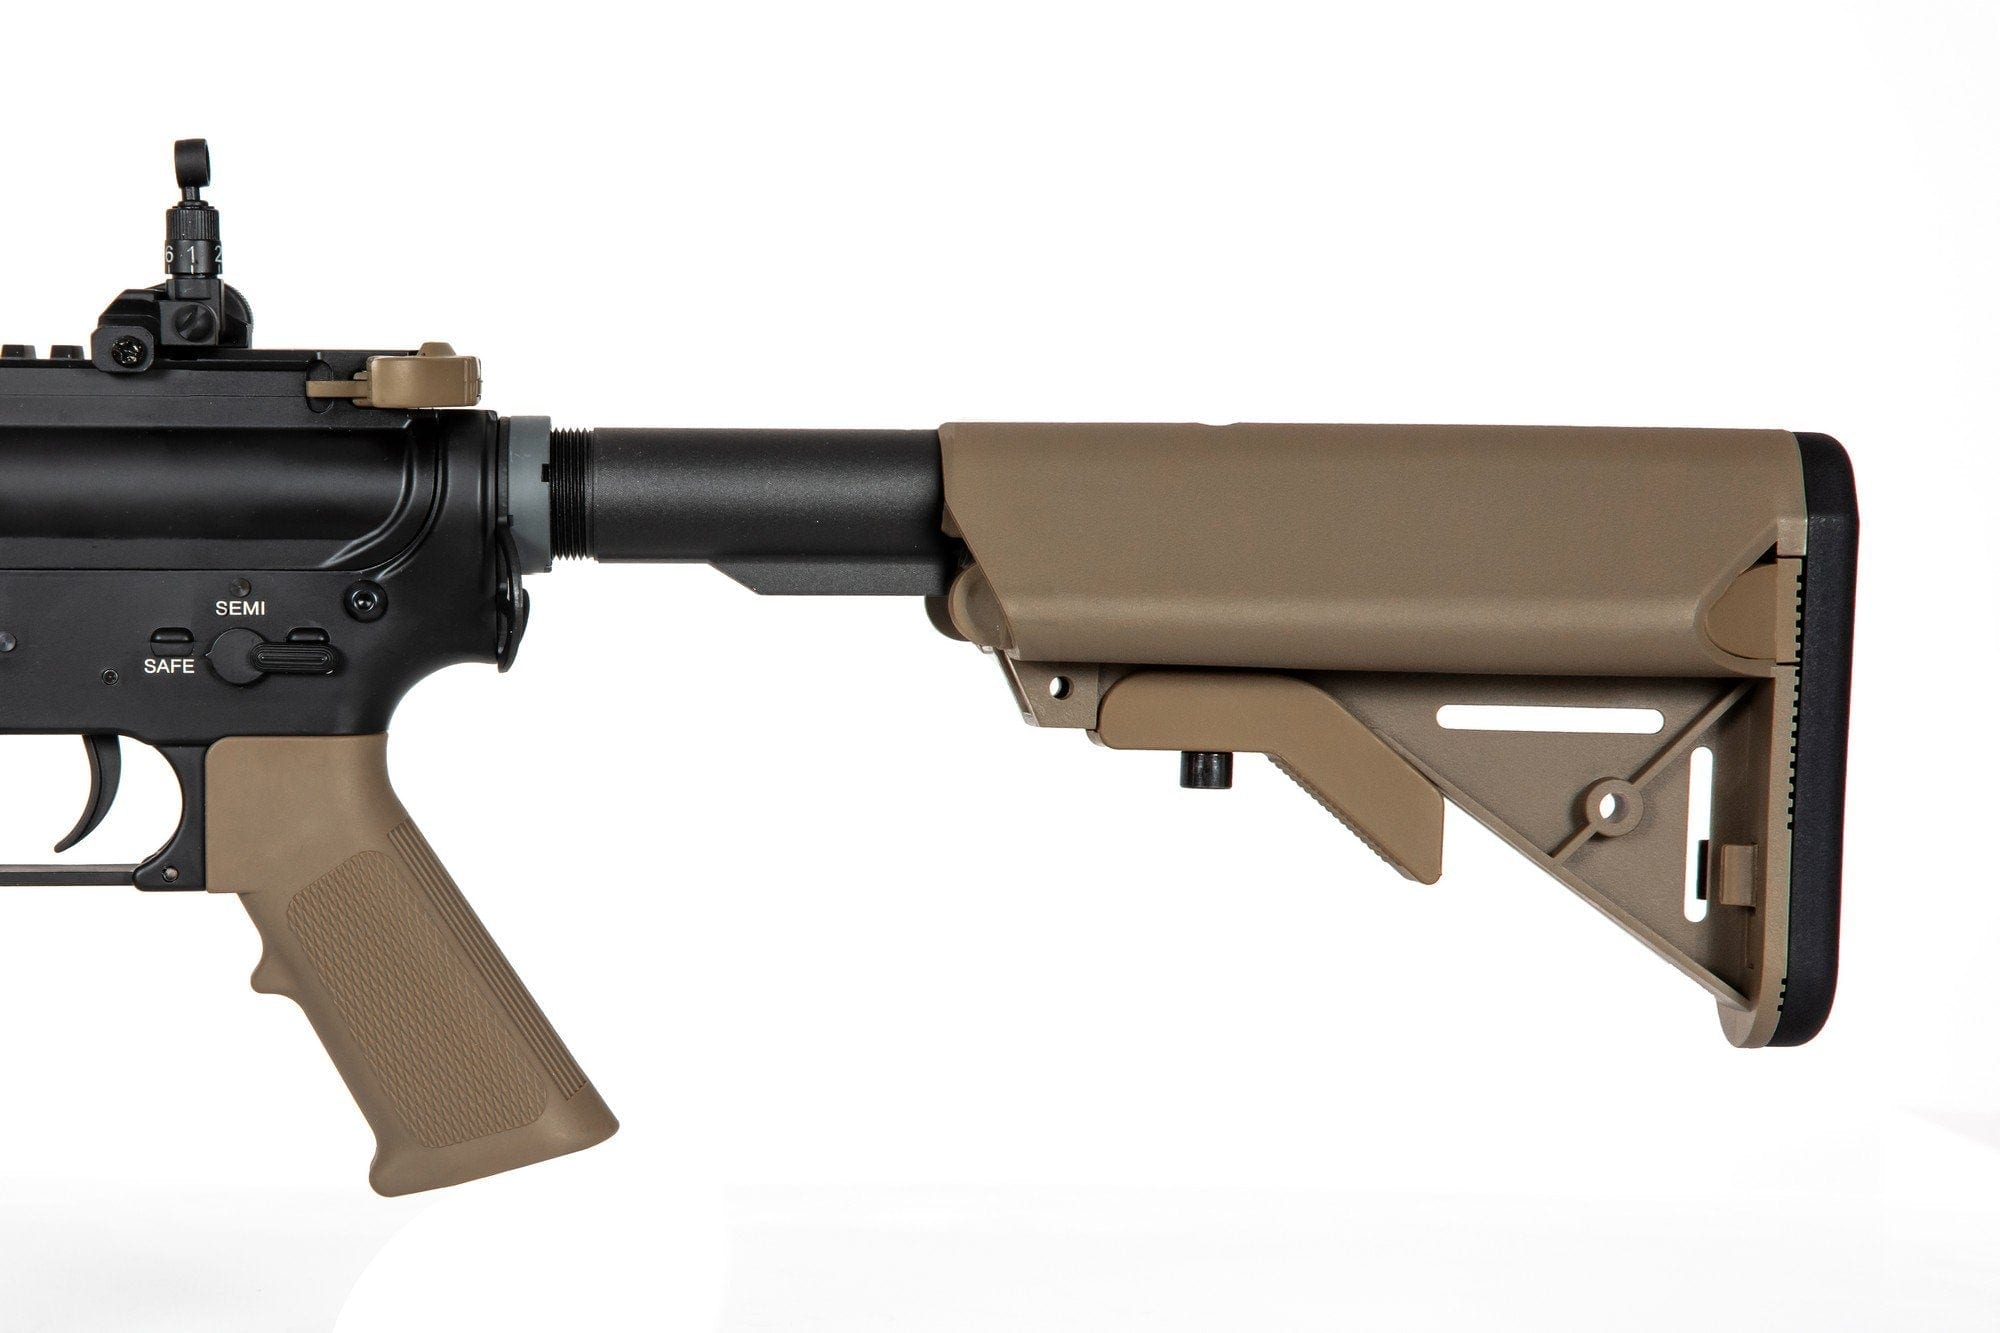 Airsoft Rifle SA-A34-HT Specna Arms ONE™ | Half-Tan by Specna Arms on Airsoft Mania Europe